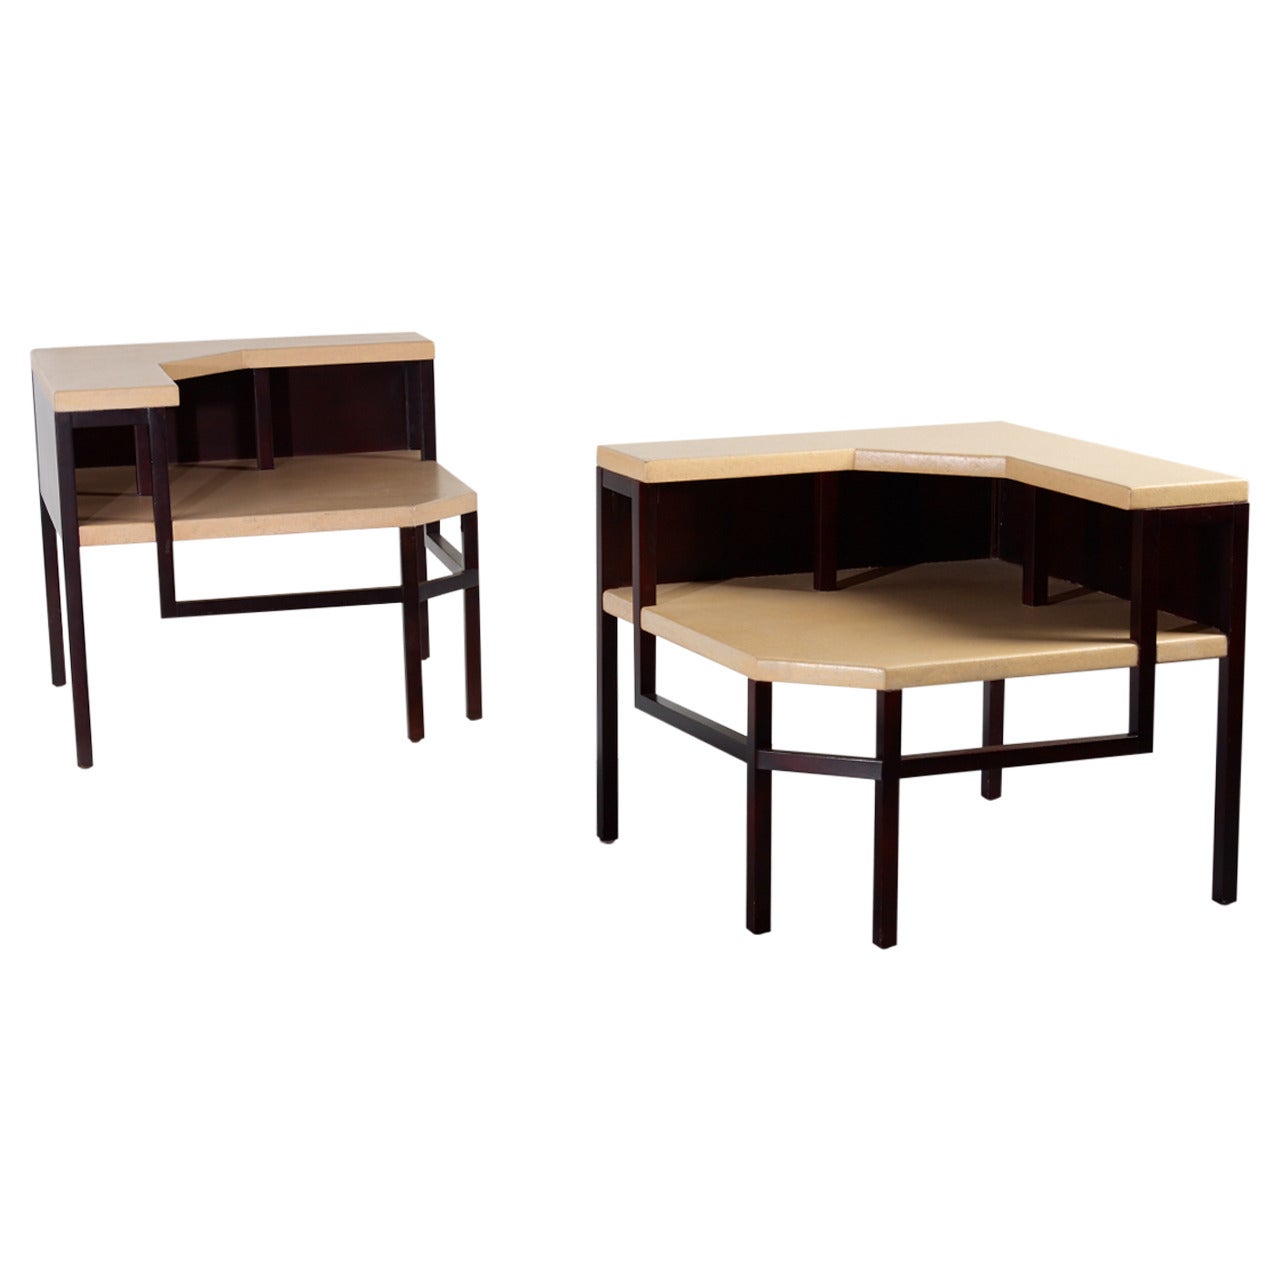 Paul Frankl Corner Tables, Lacquered Cork and Mahogany, 1951 For Sale